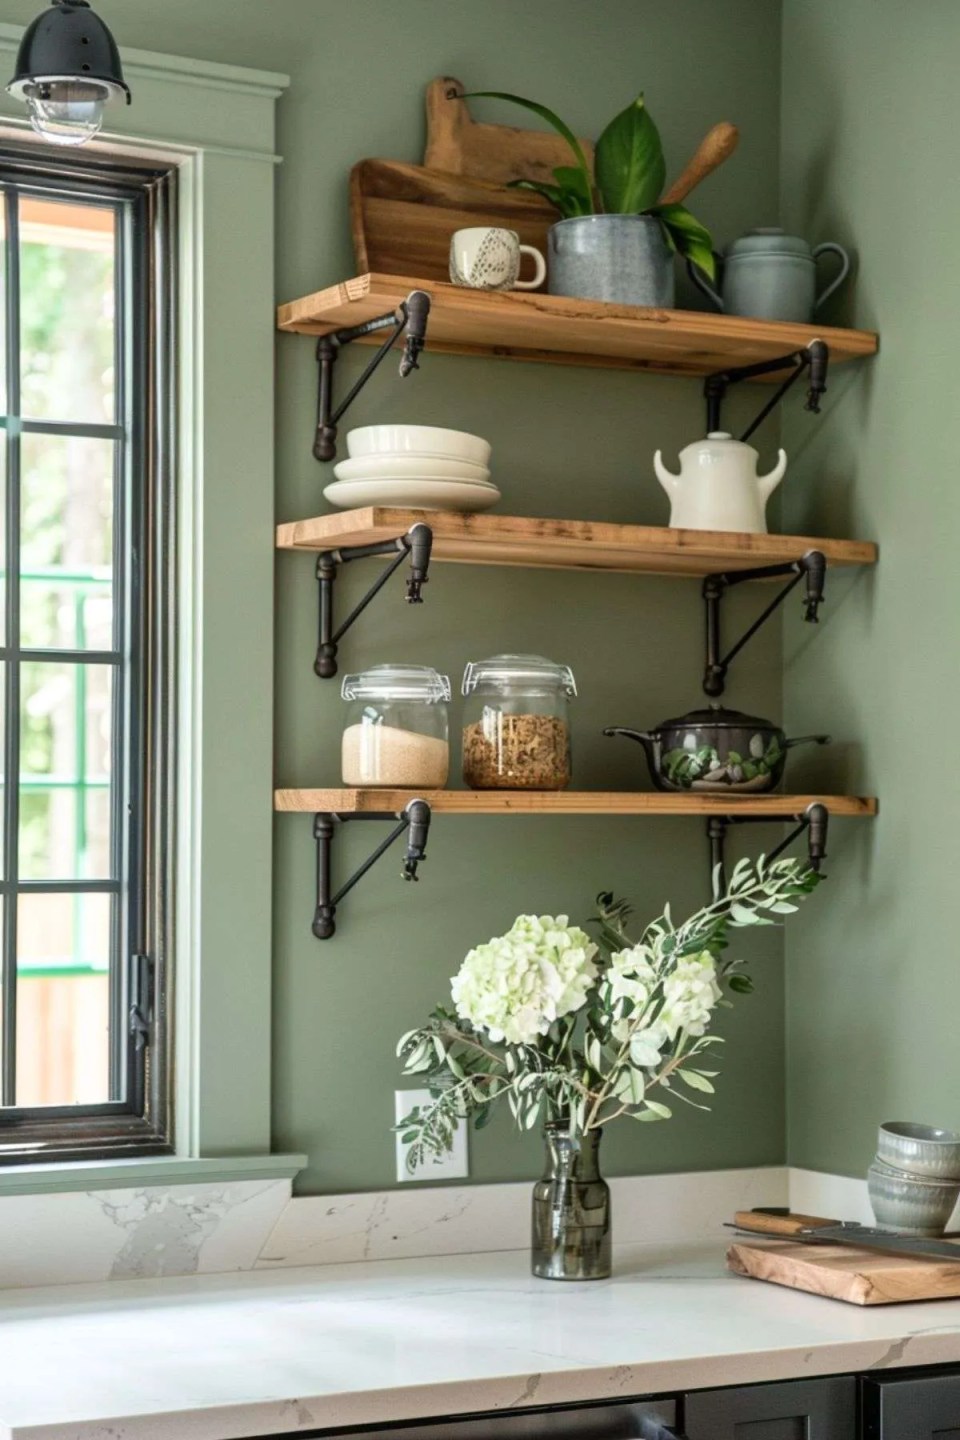 reclaimed shelving with piping brackets on a sage green wall